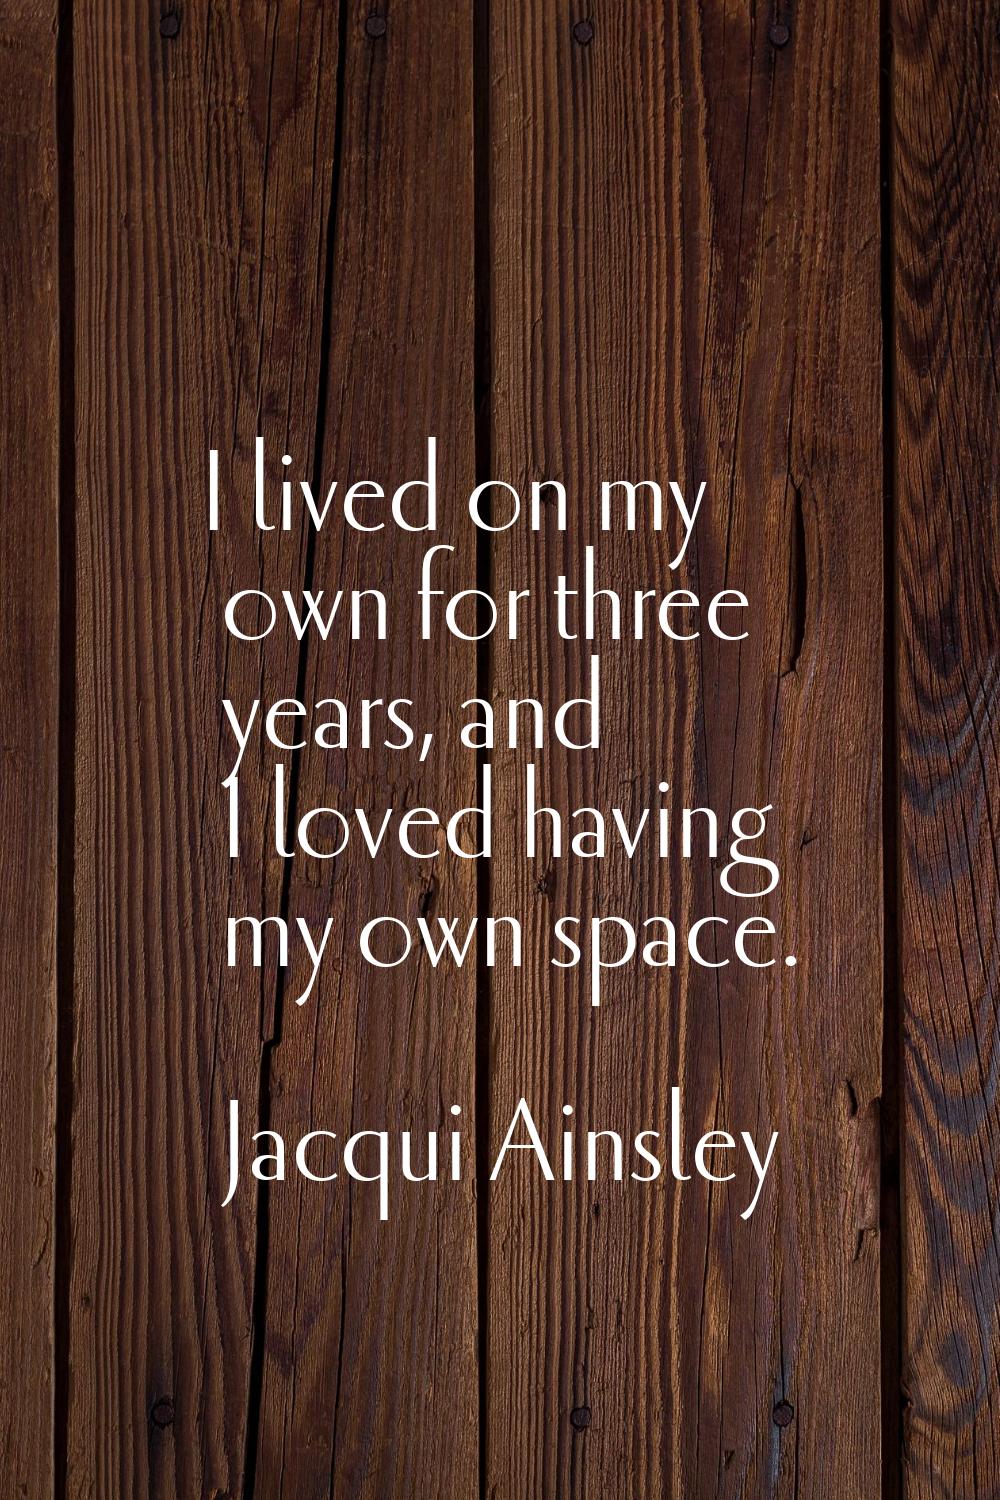 I lived on my own for three years, and I loved having my own space.